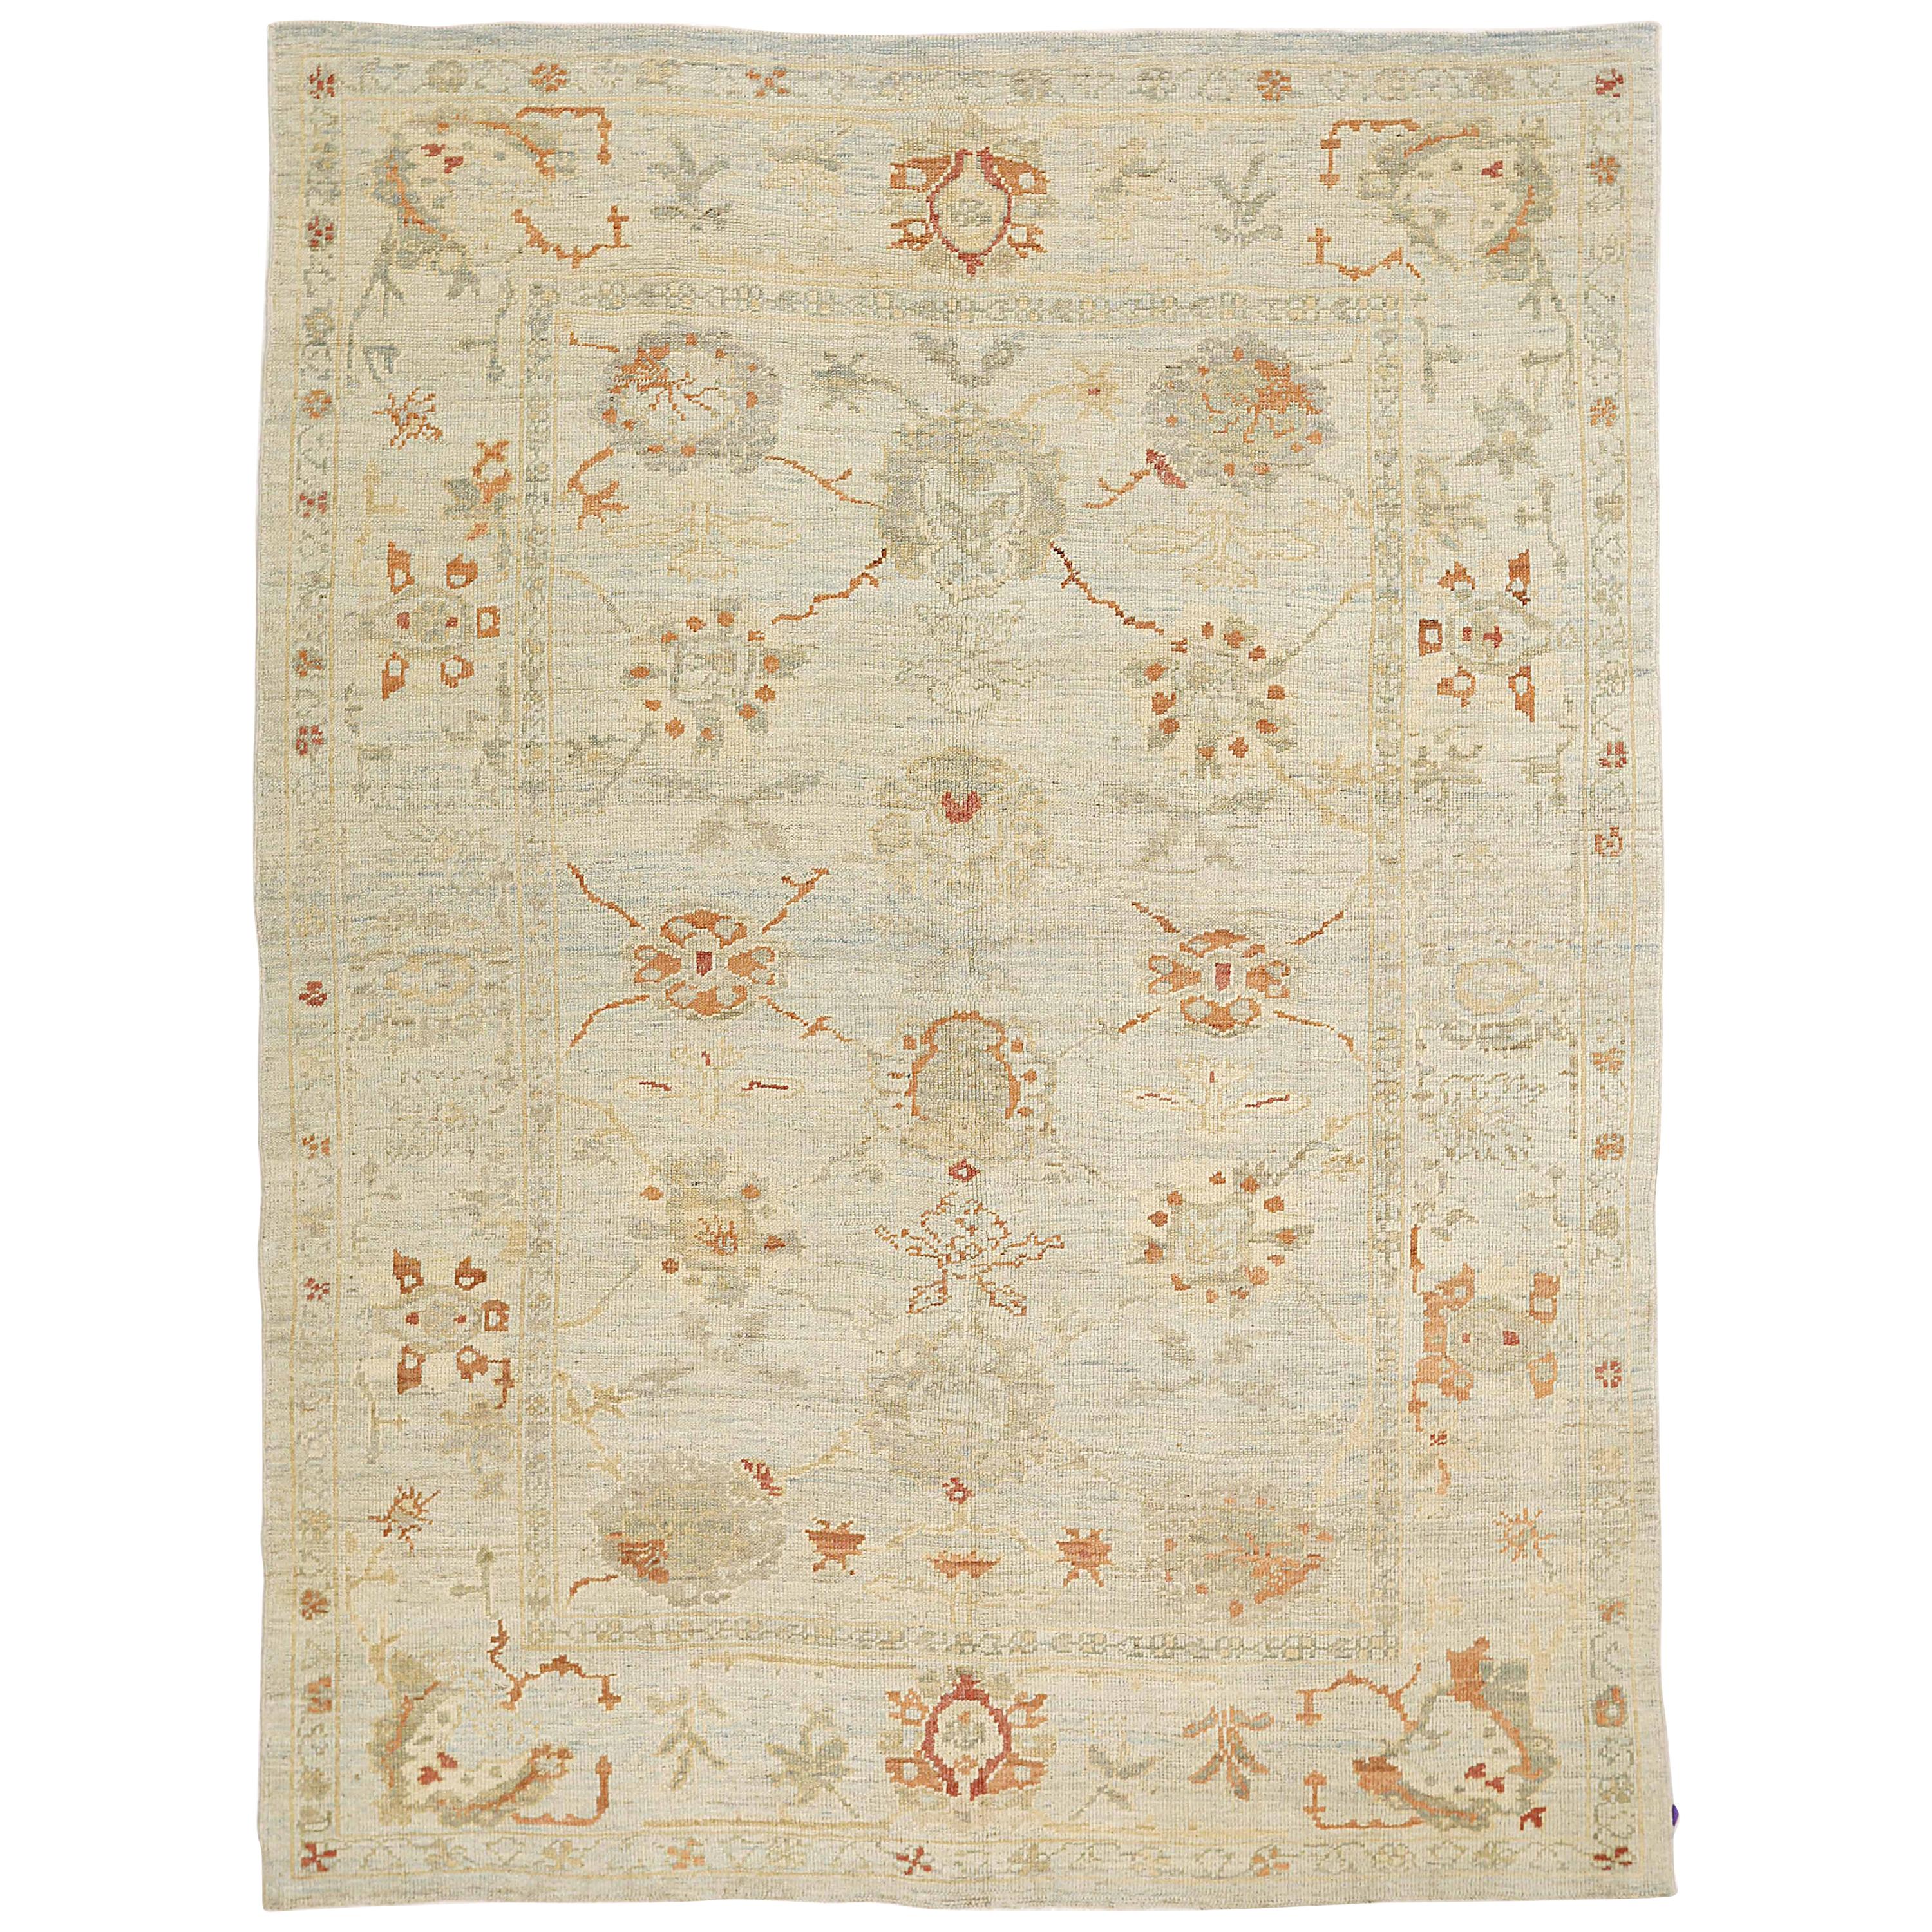 Contemporary Turkish Oushak Rug with Brown and Gray Botanical Motifs